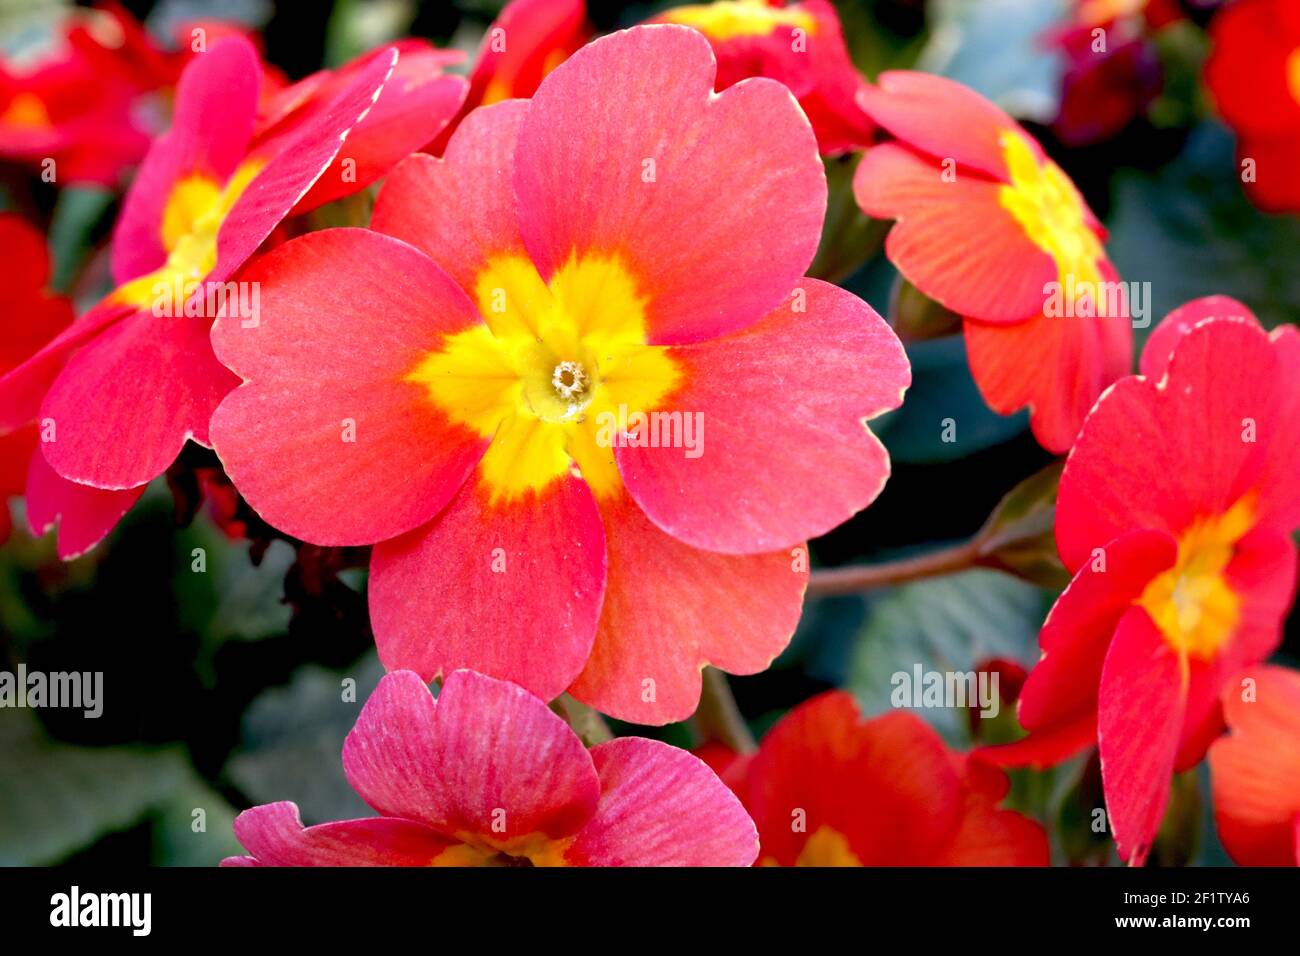 Primula polyanthus ‘Crescendo Bright Red’ red primroses with yellow centres,  March, England, UK Stock Photo